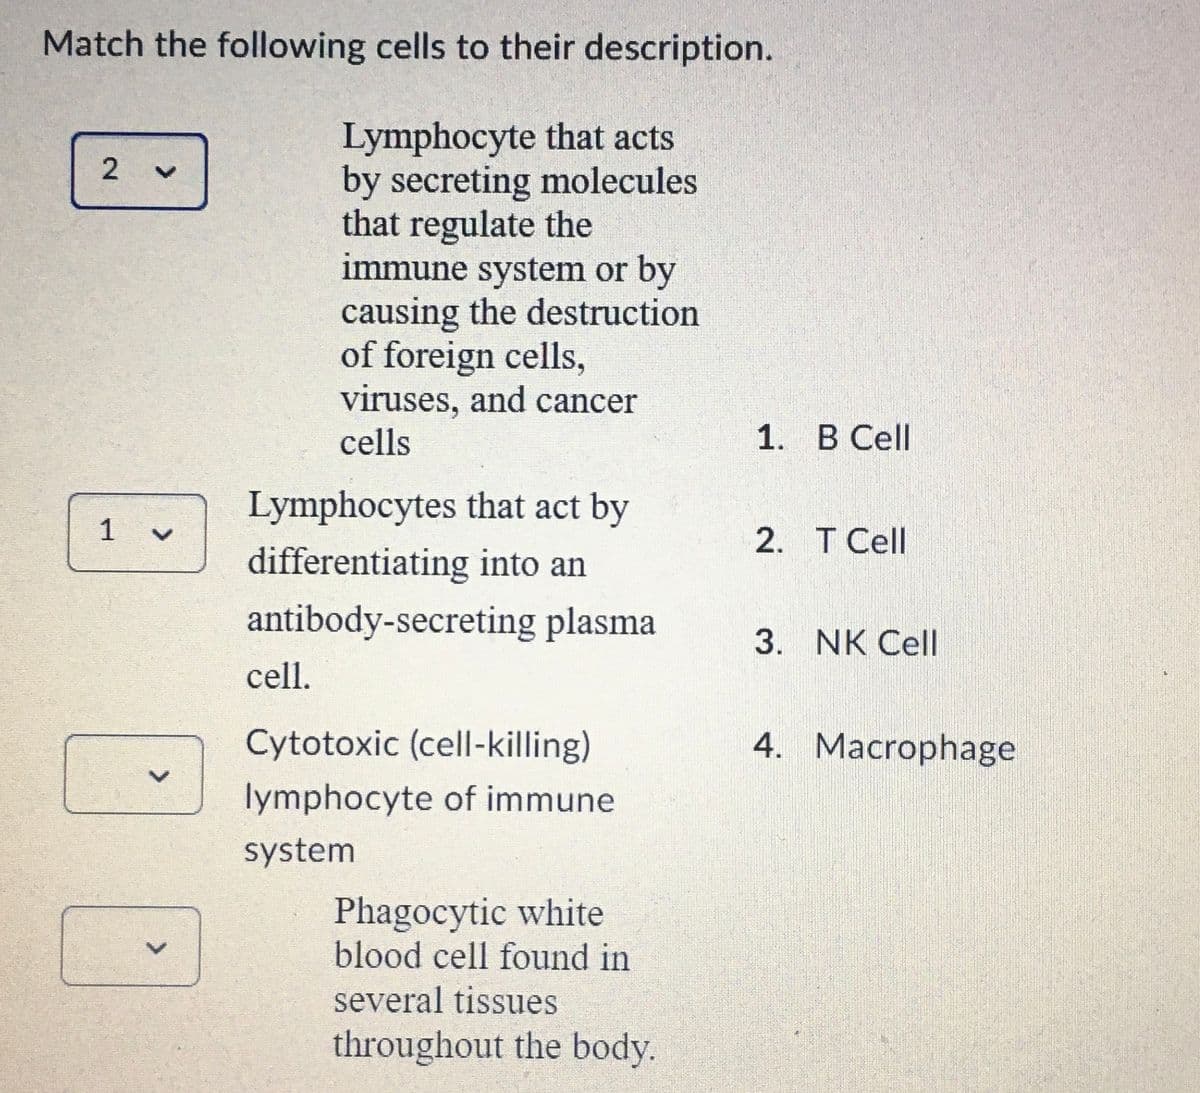 Match the following cells to their description.
Lymphocyte that acts
by secreting molecules
that regulate the
immune system or by
causing the destruction
of foreign cells,
viruses, and cancer
cells
2
1
V
>
Lymphocytes that act by
differentiating into an
antibody-secreting plasma.
cell.
Cytotoxic (cell-killing)
lymphocyte of immune
system
Phagocytic white
blood cell found in
several tissues
throughout the body.
1. B Cell
2. T Cell
3. NK Cell
4. Macrophage